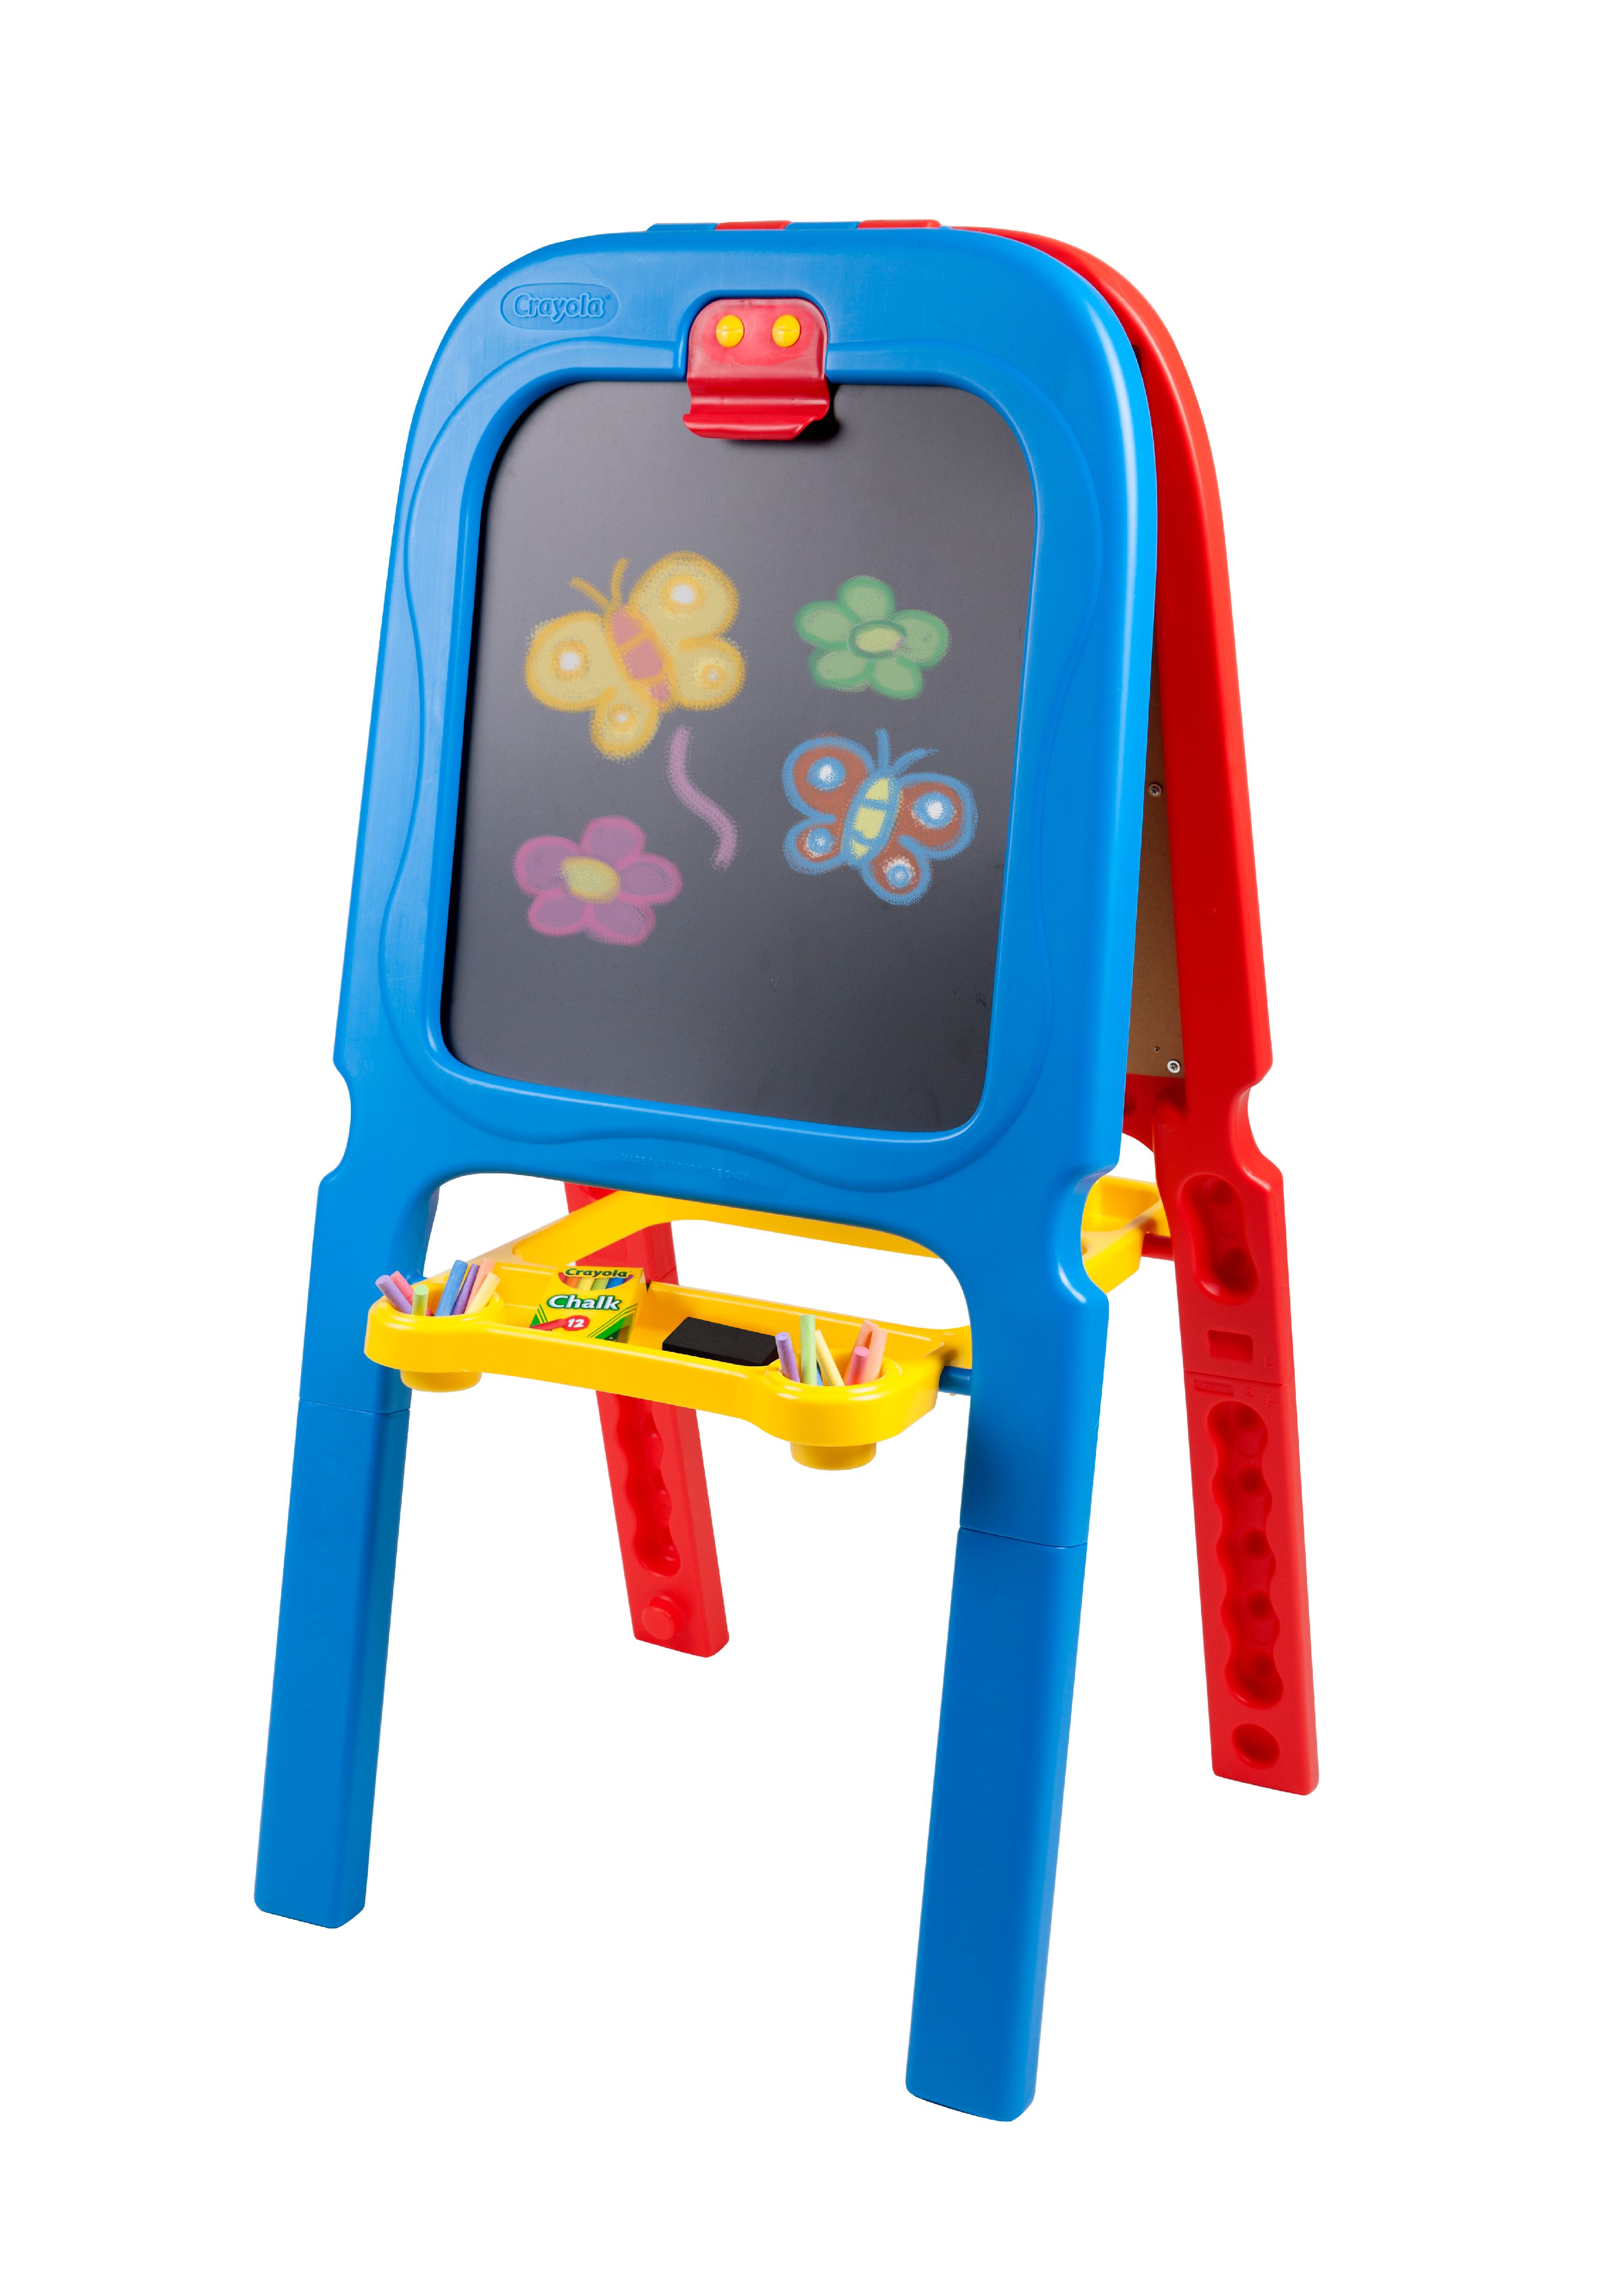 Crayola 3-in-1 Double Easel with Magnetic Letters (Blue, Red) - image 2 of 4